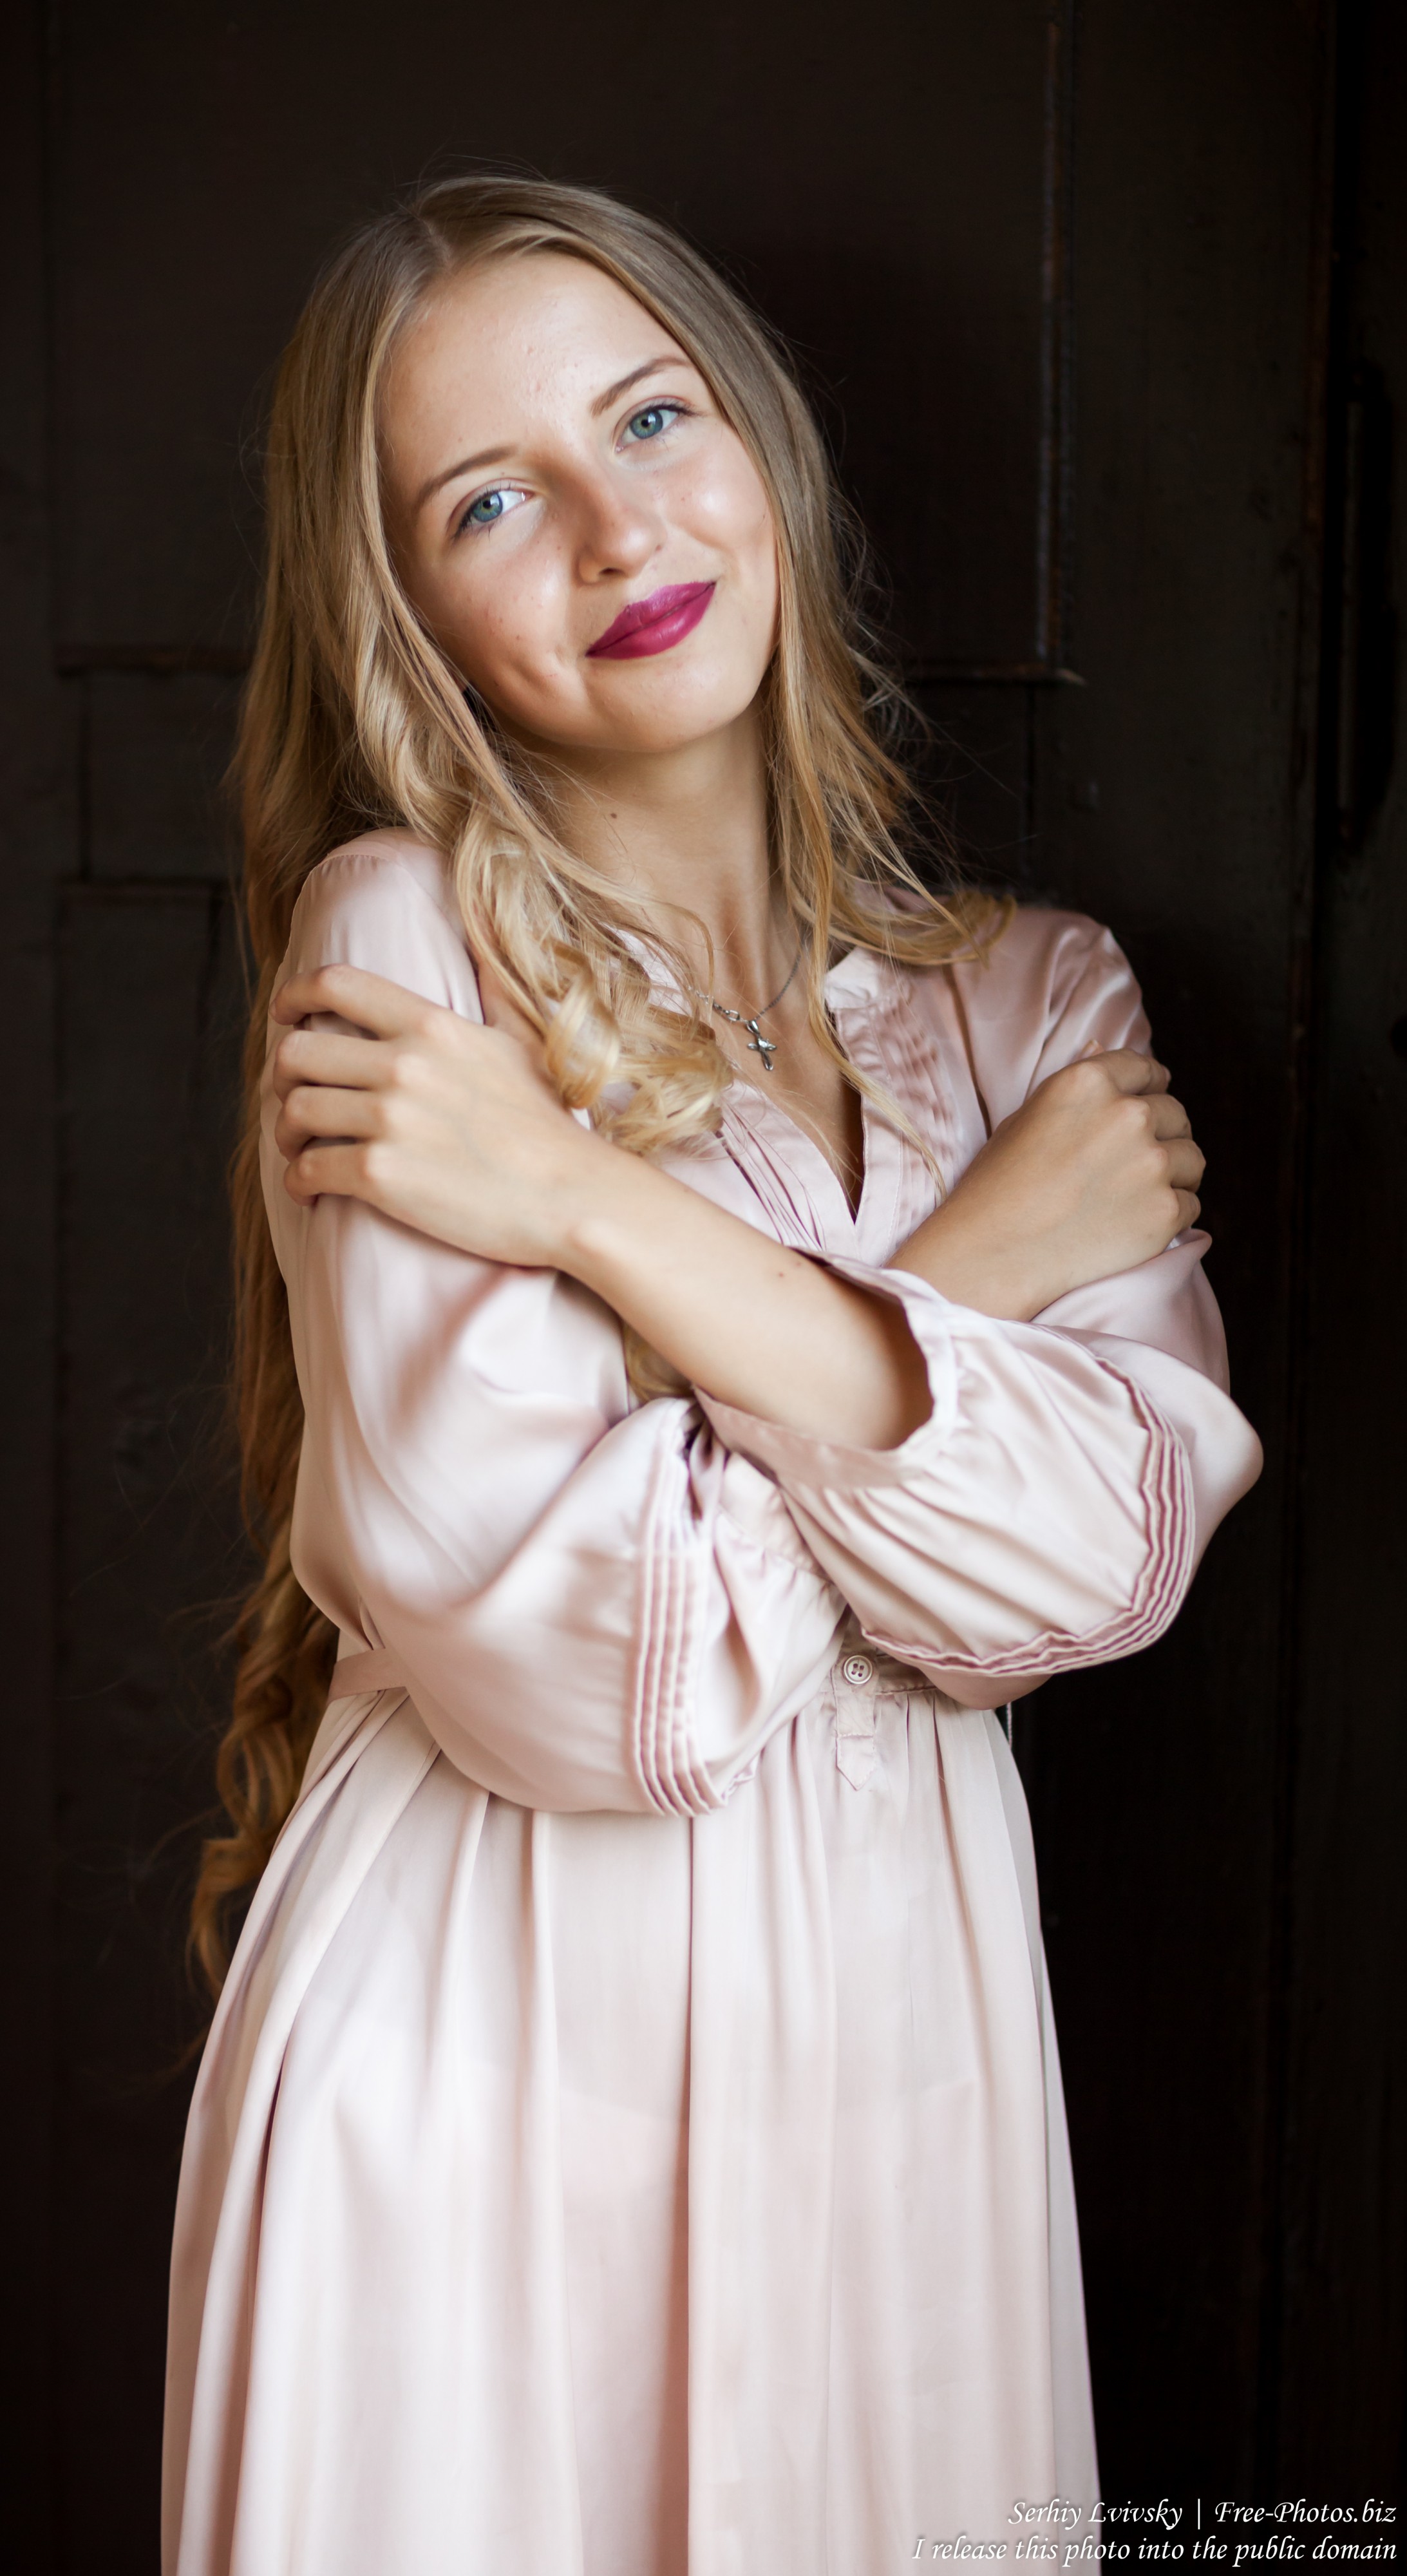 Photo Of Ania A 14 Year Old Natural Blonde Girl Photographed By